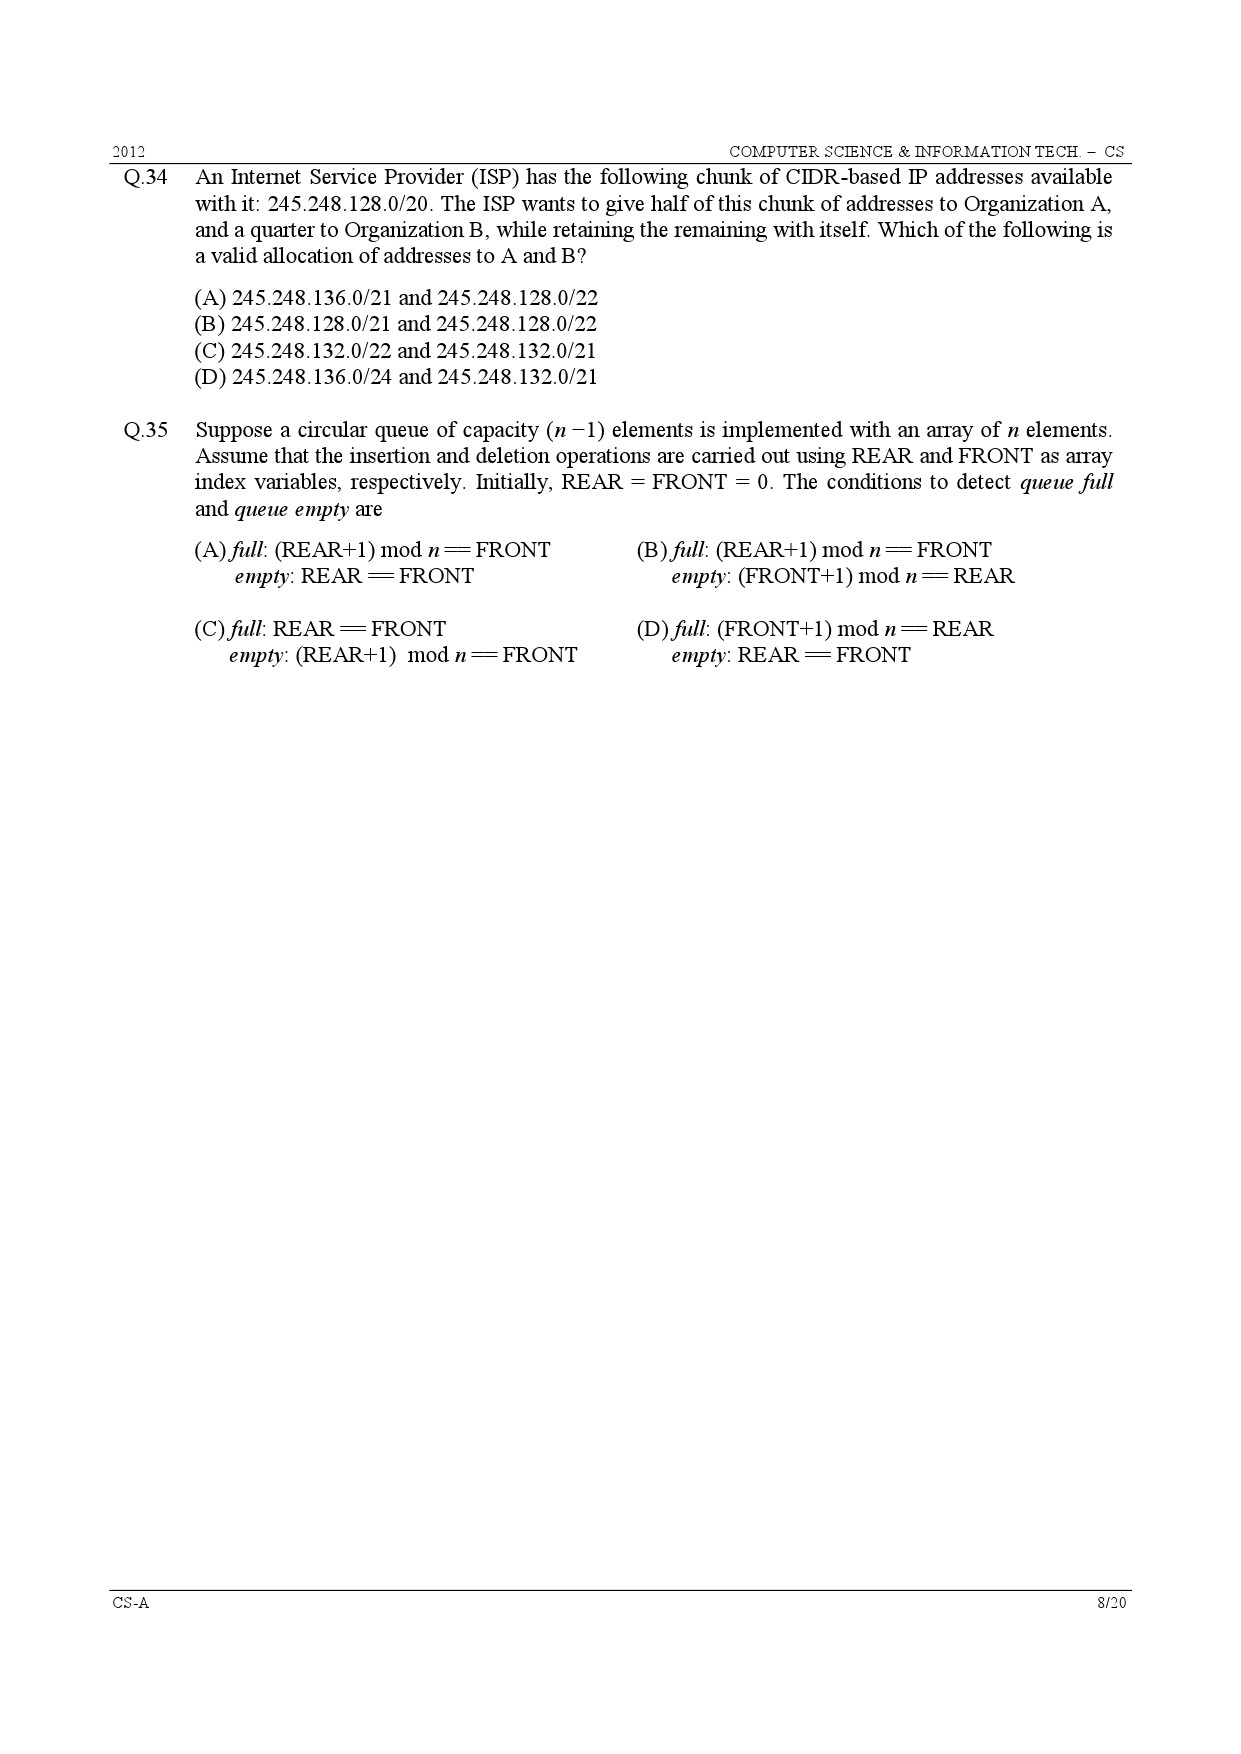 GATE Exam Question Paper 2012 Computer Science and Information Technology 8